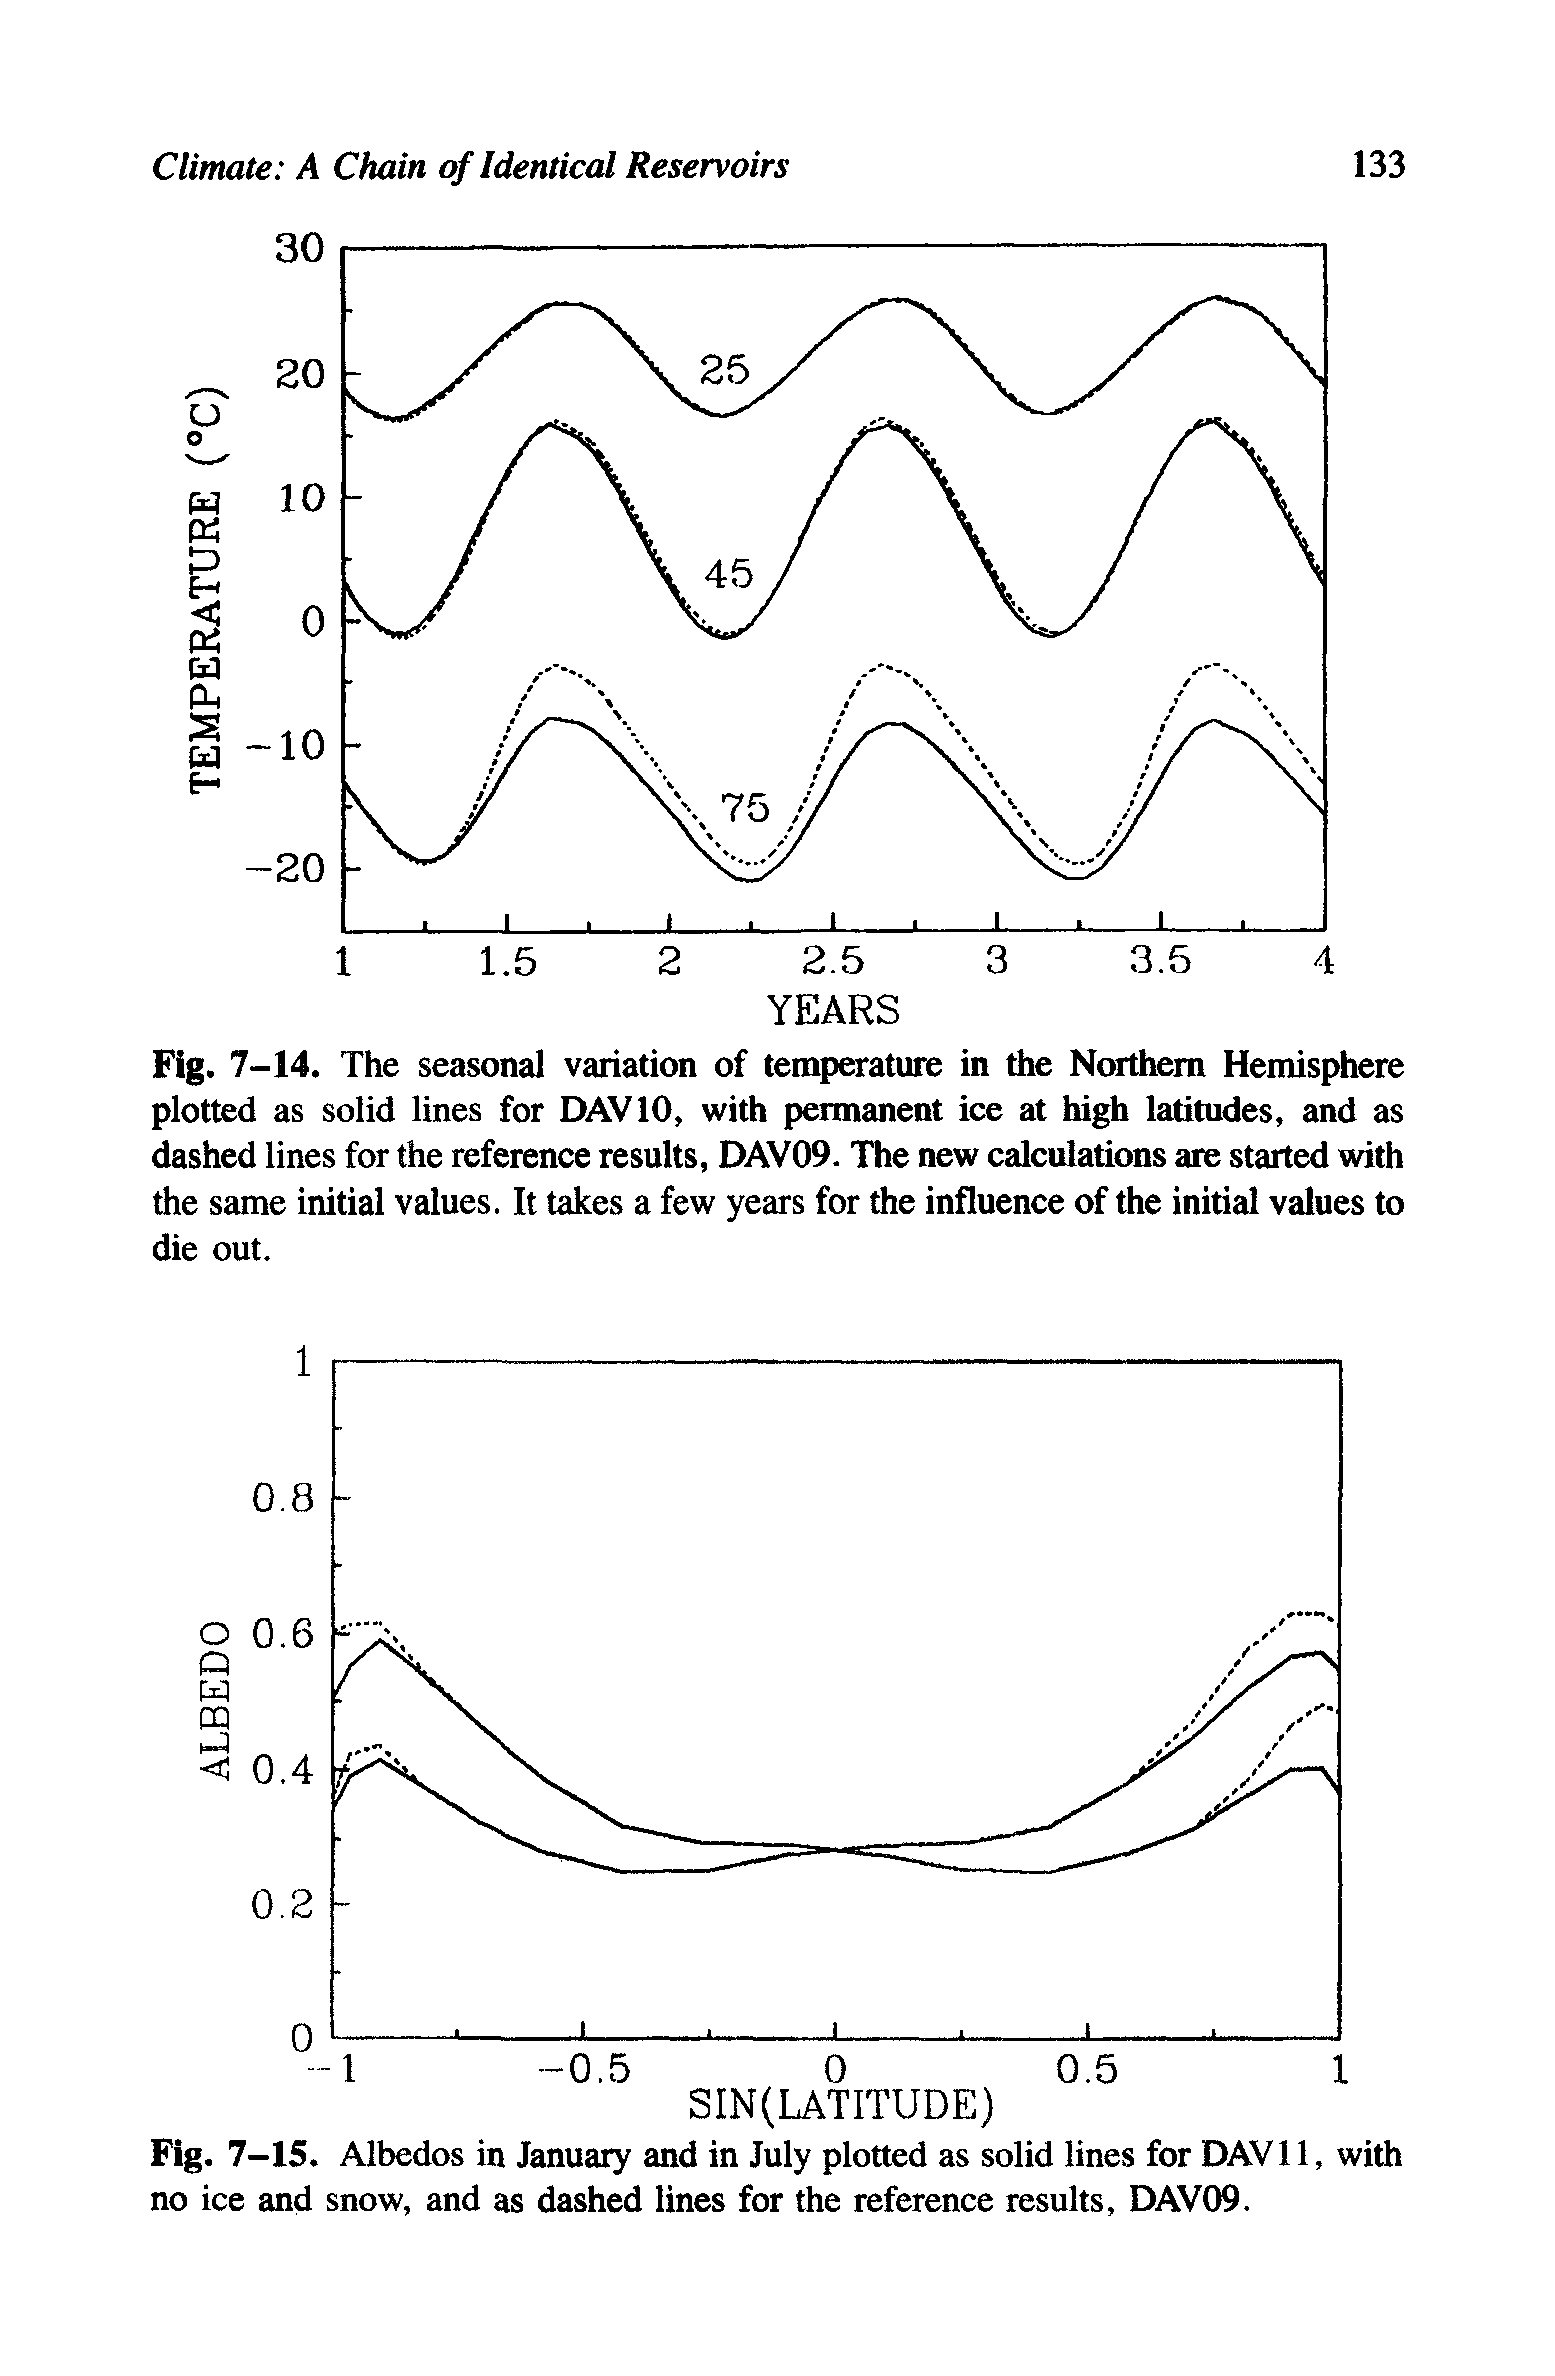 Fig. 7-14. The seasonal variation of temperature in the Northern Hemisphere plotted as solid lines for DAV10, with permanent ice at high latitudes, and as dashed lines for the reference results, DAV09. The new calculations are started with the same initial values. It takes a few years for the influence of the initial values to die out.